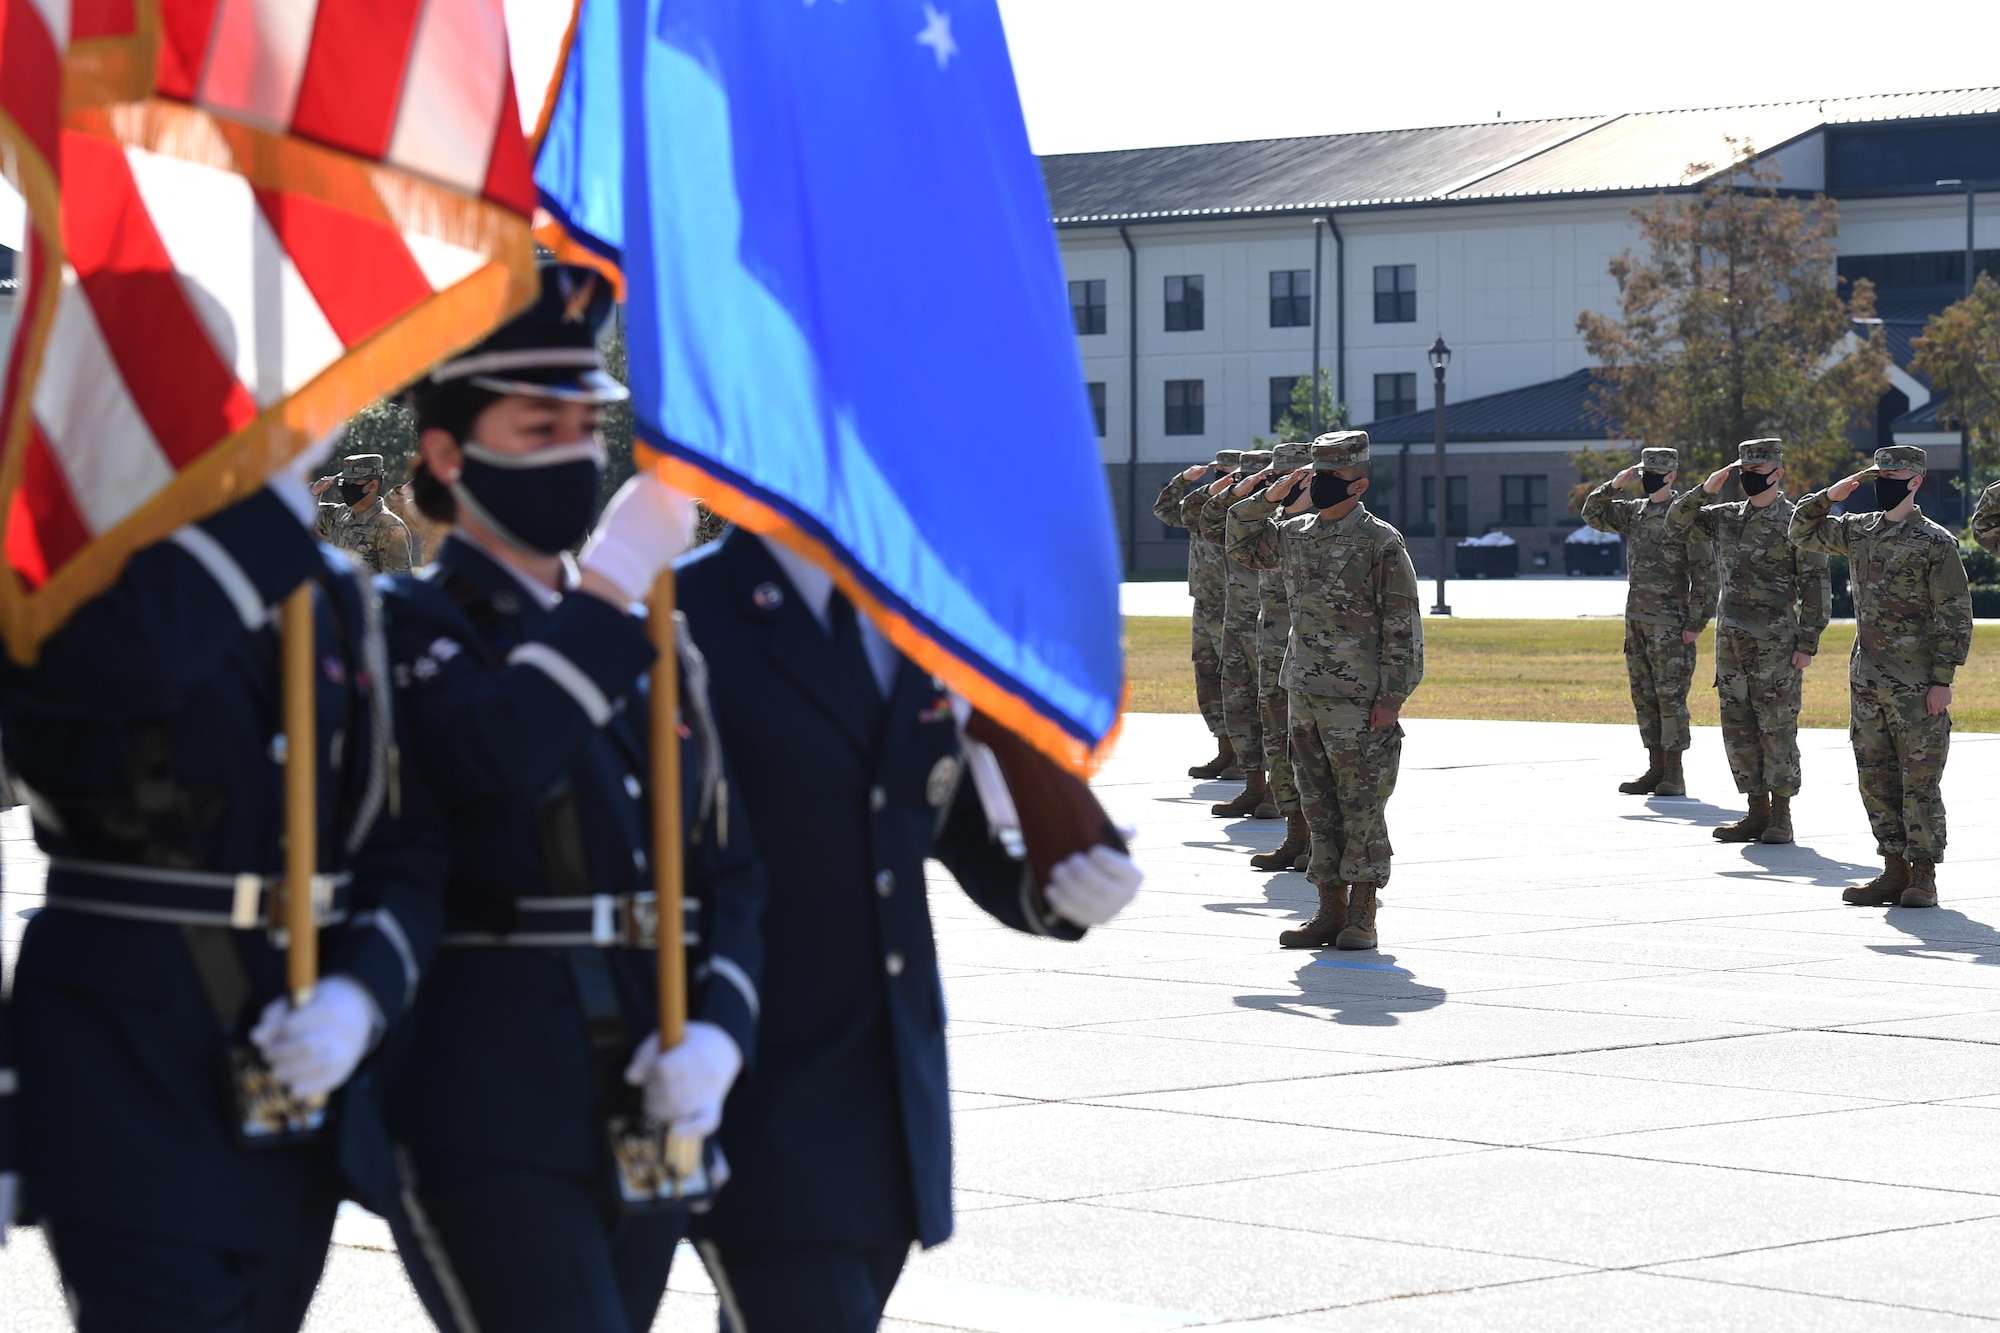 The Keesler Honor Guard marches off of the Levitow Training Support Facility drill pad during the final basic military training graduation ceremony at Keesler Air Force Base, Mississippi, Nov. 6, 2020. Nearly 60 trainees from the 37th Training Wing Detachment 5 completed the six-week BMT course. Throughout the duration of BMT training at Keesler, 18 flights and 939 Airmen graduated. (U.S. Air Force photo by Kemberly Groue)